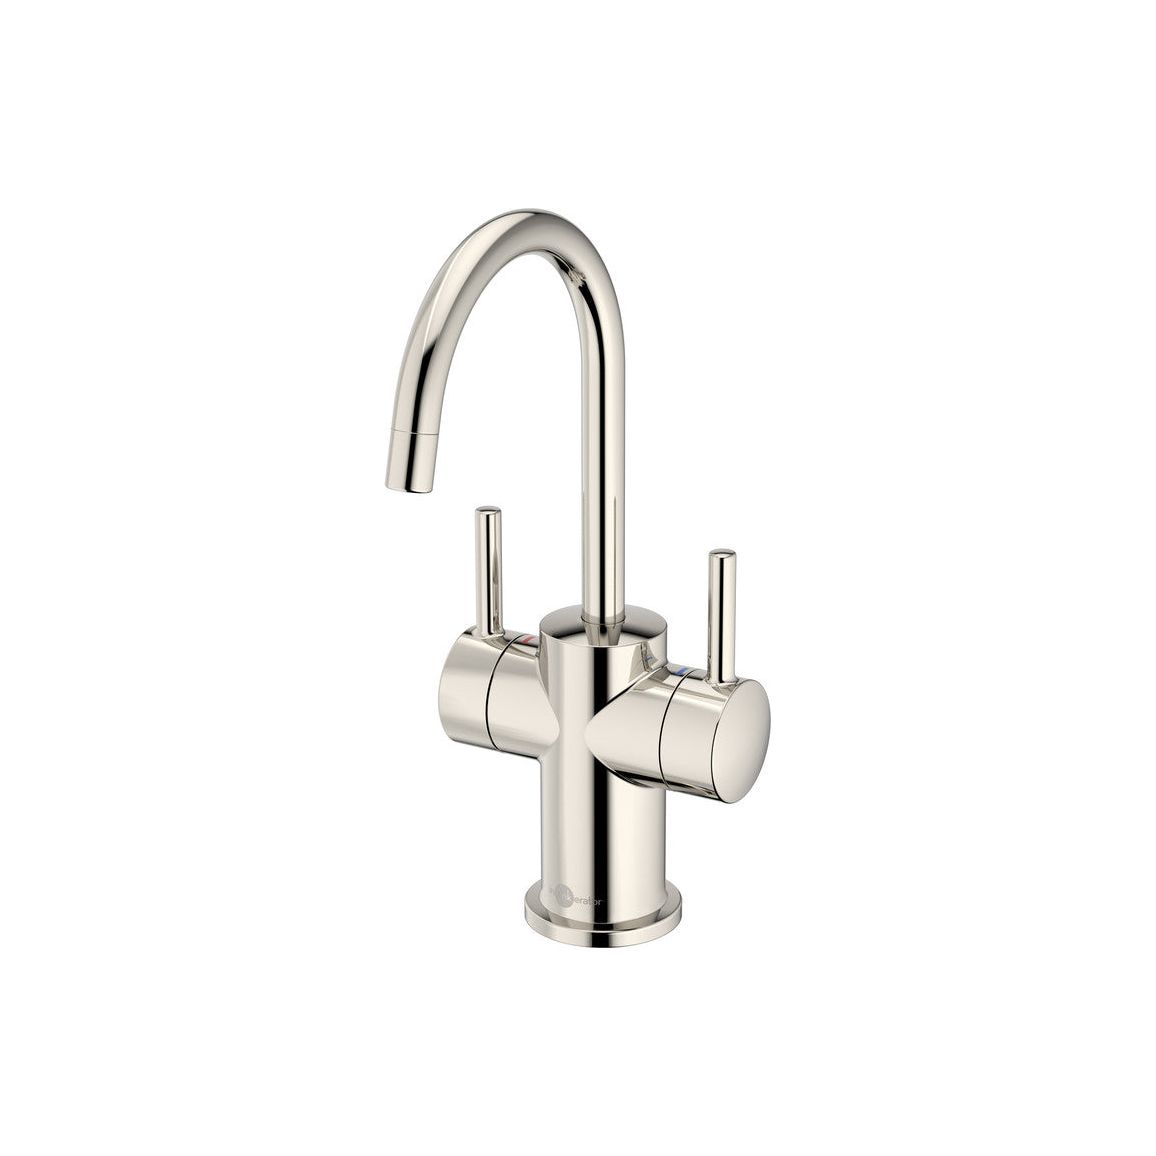 InSinkErator FHC3010 Hot/Cold Water Mixer Tap & Standard Tank - Polished Nickel